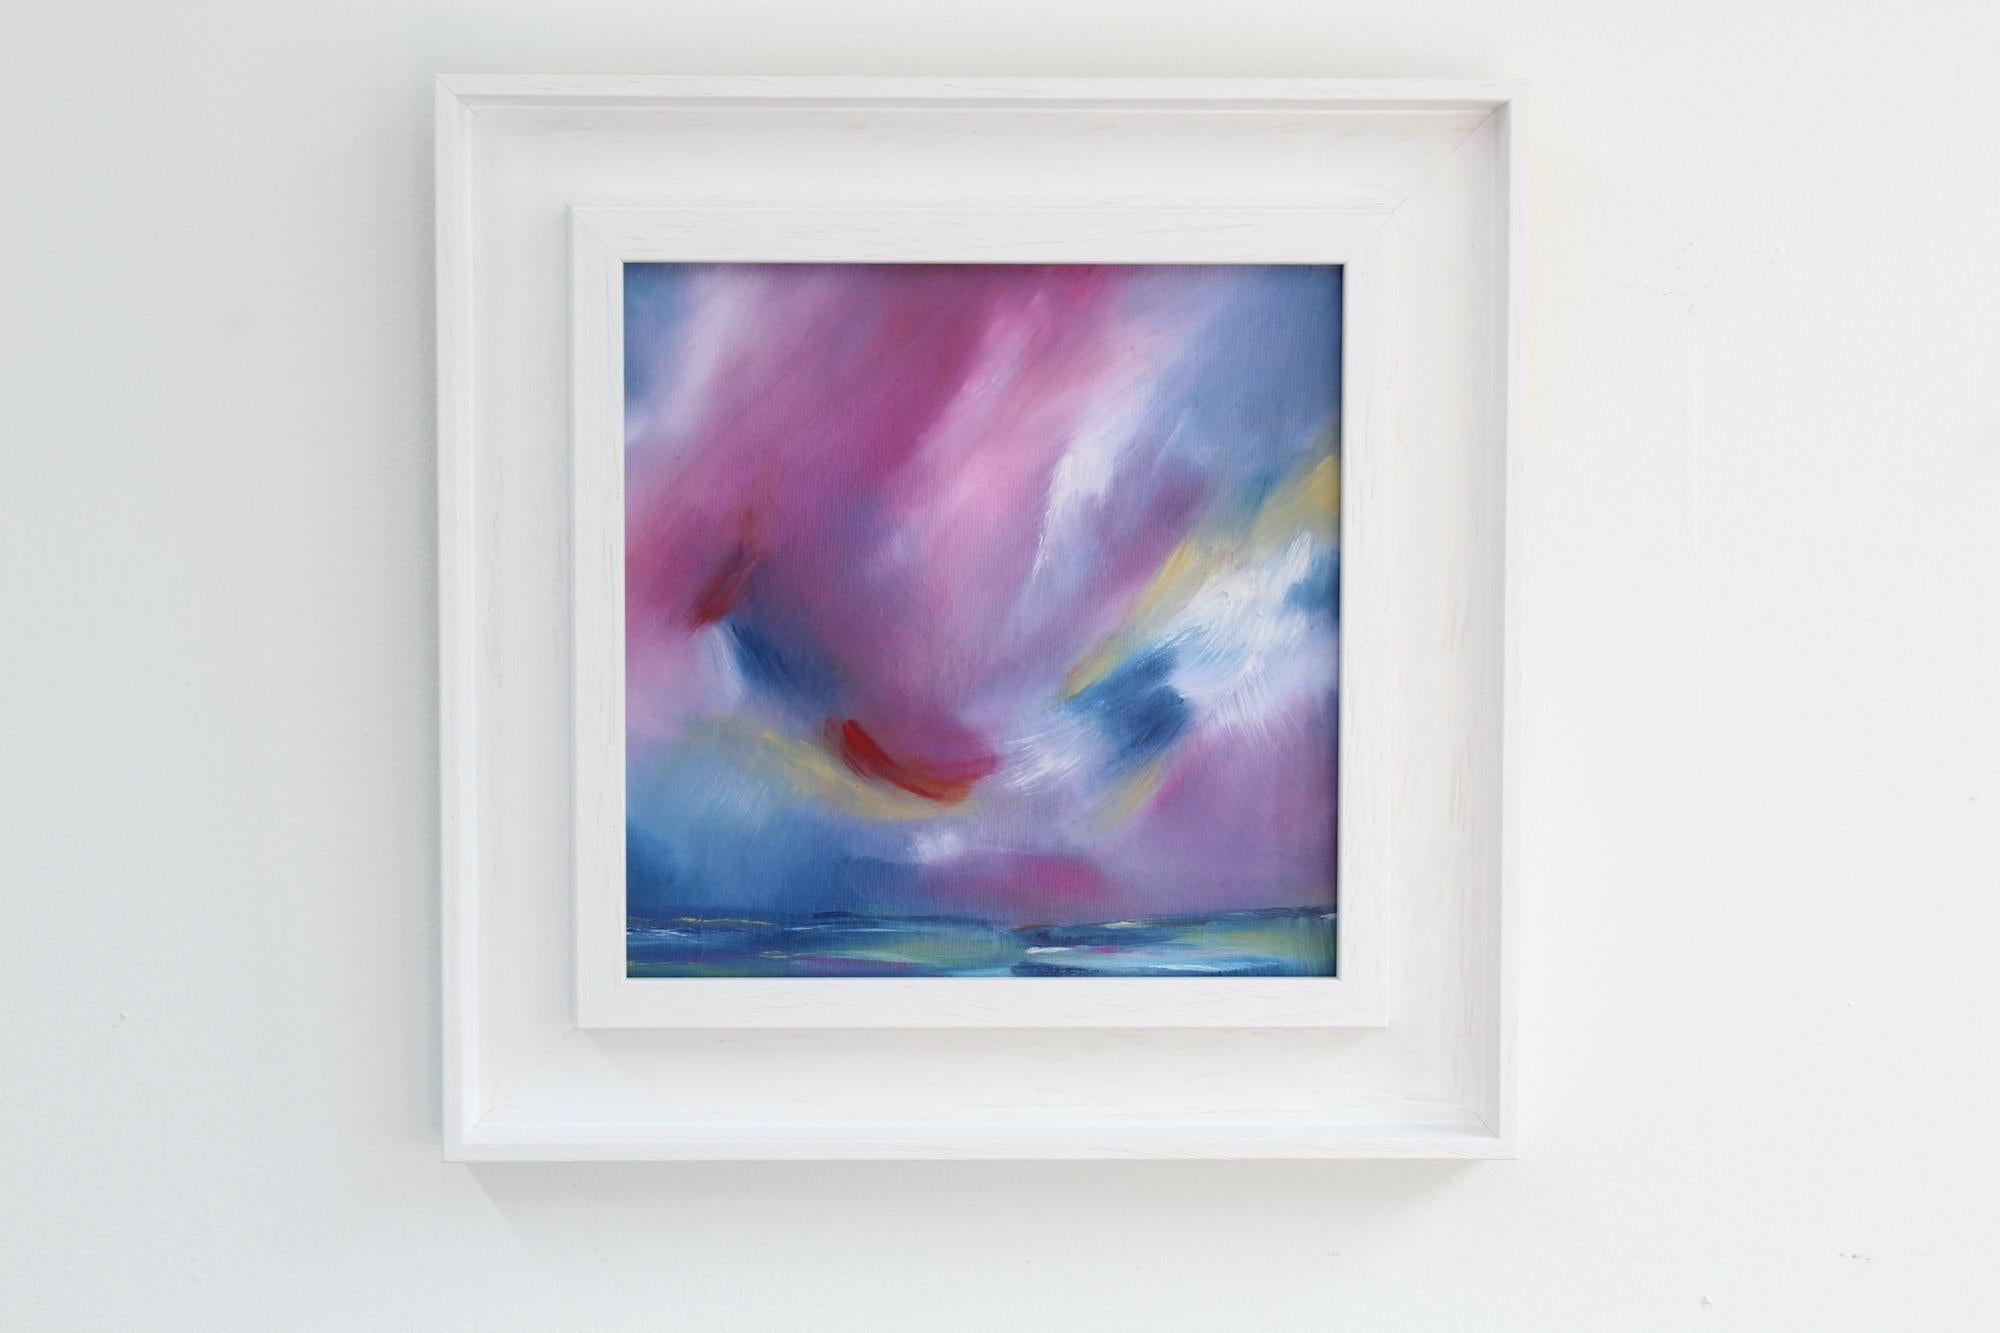 Exaltation by Christina Sadler [2022]

original
Oil on Board
Image size: H:29 cm x W:29 cm
Complete Size of Unframed Work: H:20 cm x W:20 cm x D:1cm
Frame Size: H:29 cm x W:29 cm x D:3cm
Sold Framed
Please note that insitu images are purely an